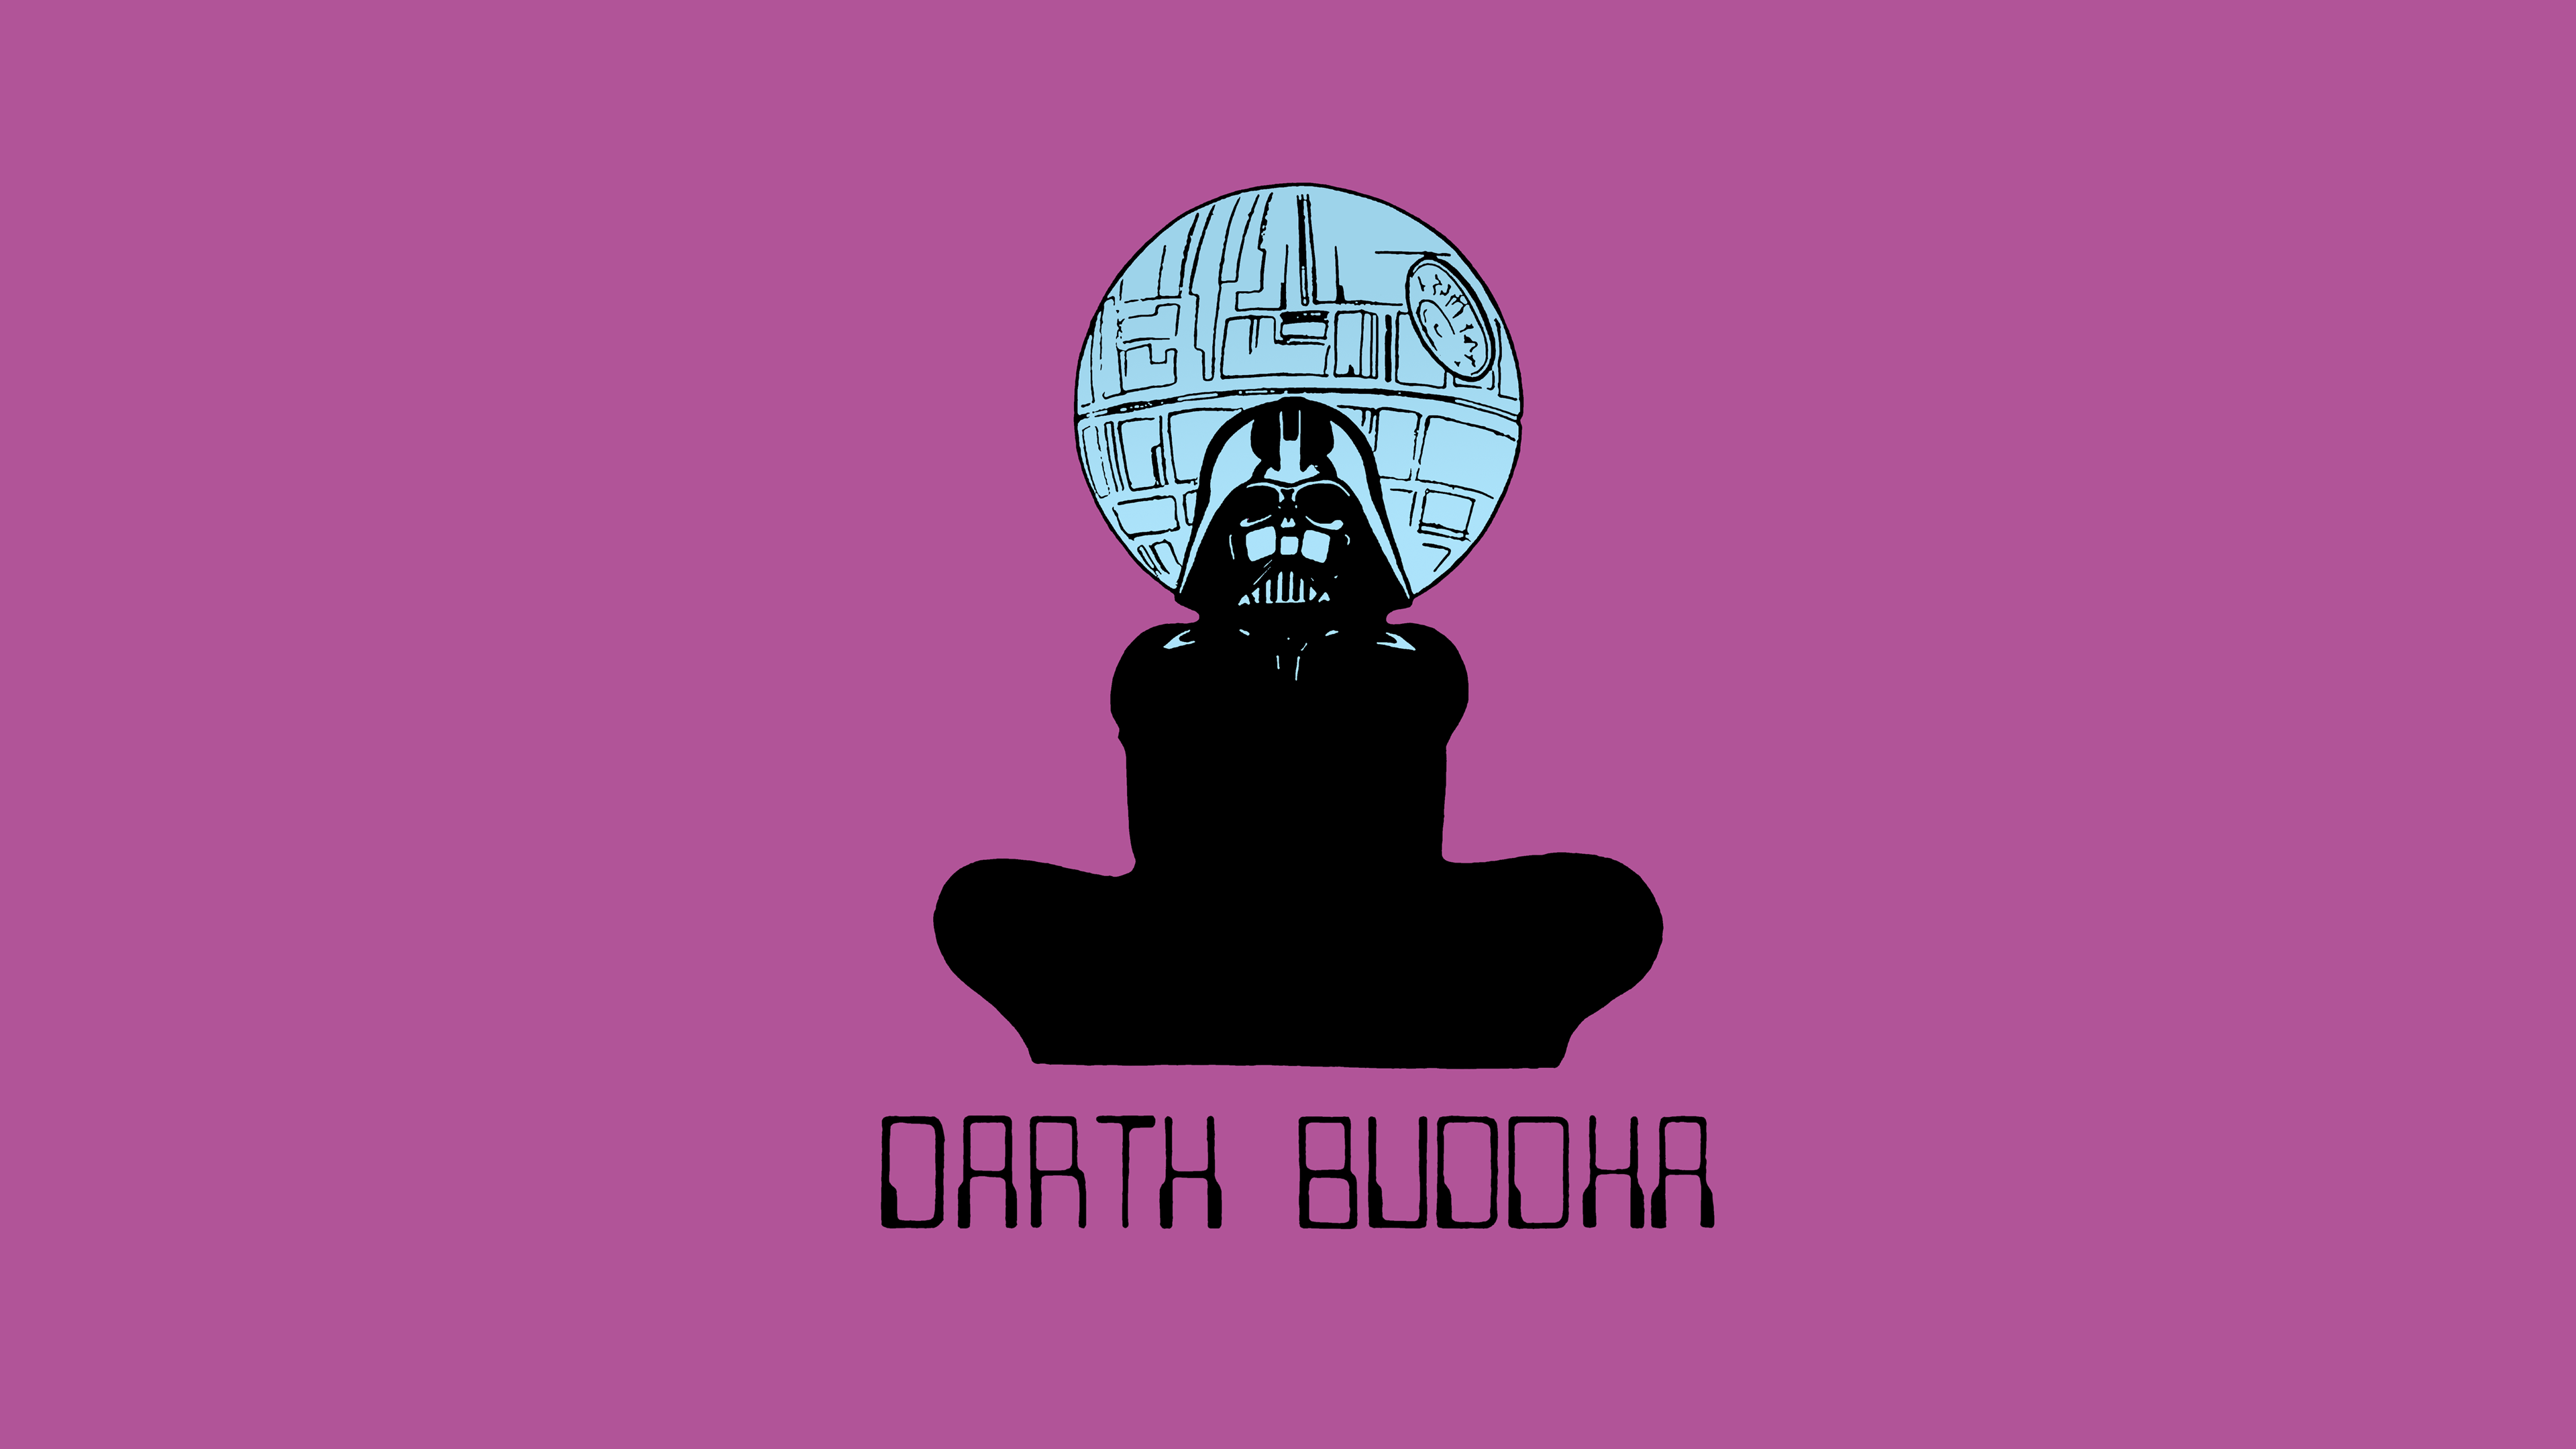 I remastered the Darth Buddha poster and made it into a UHD